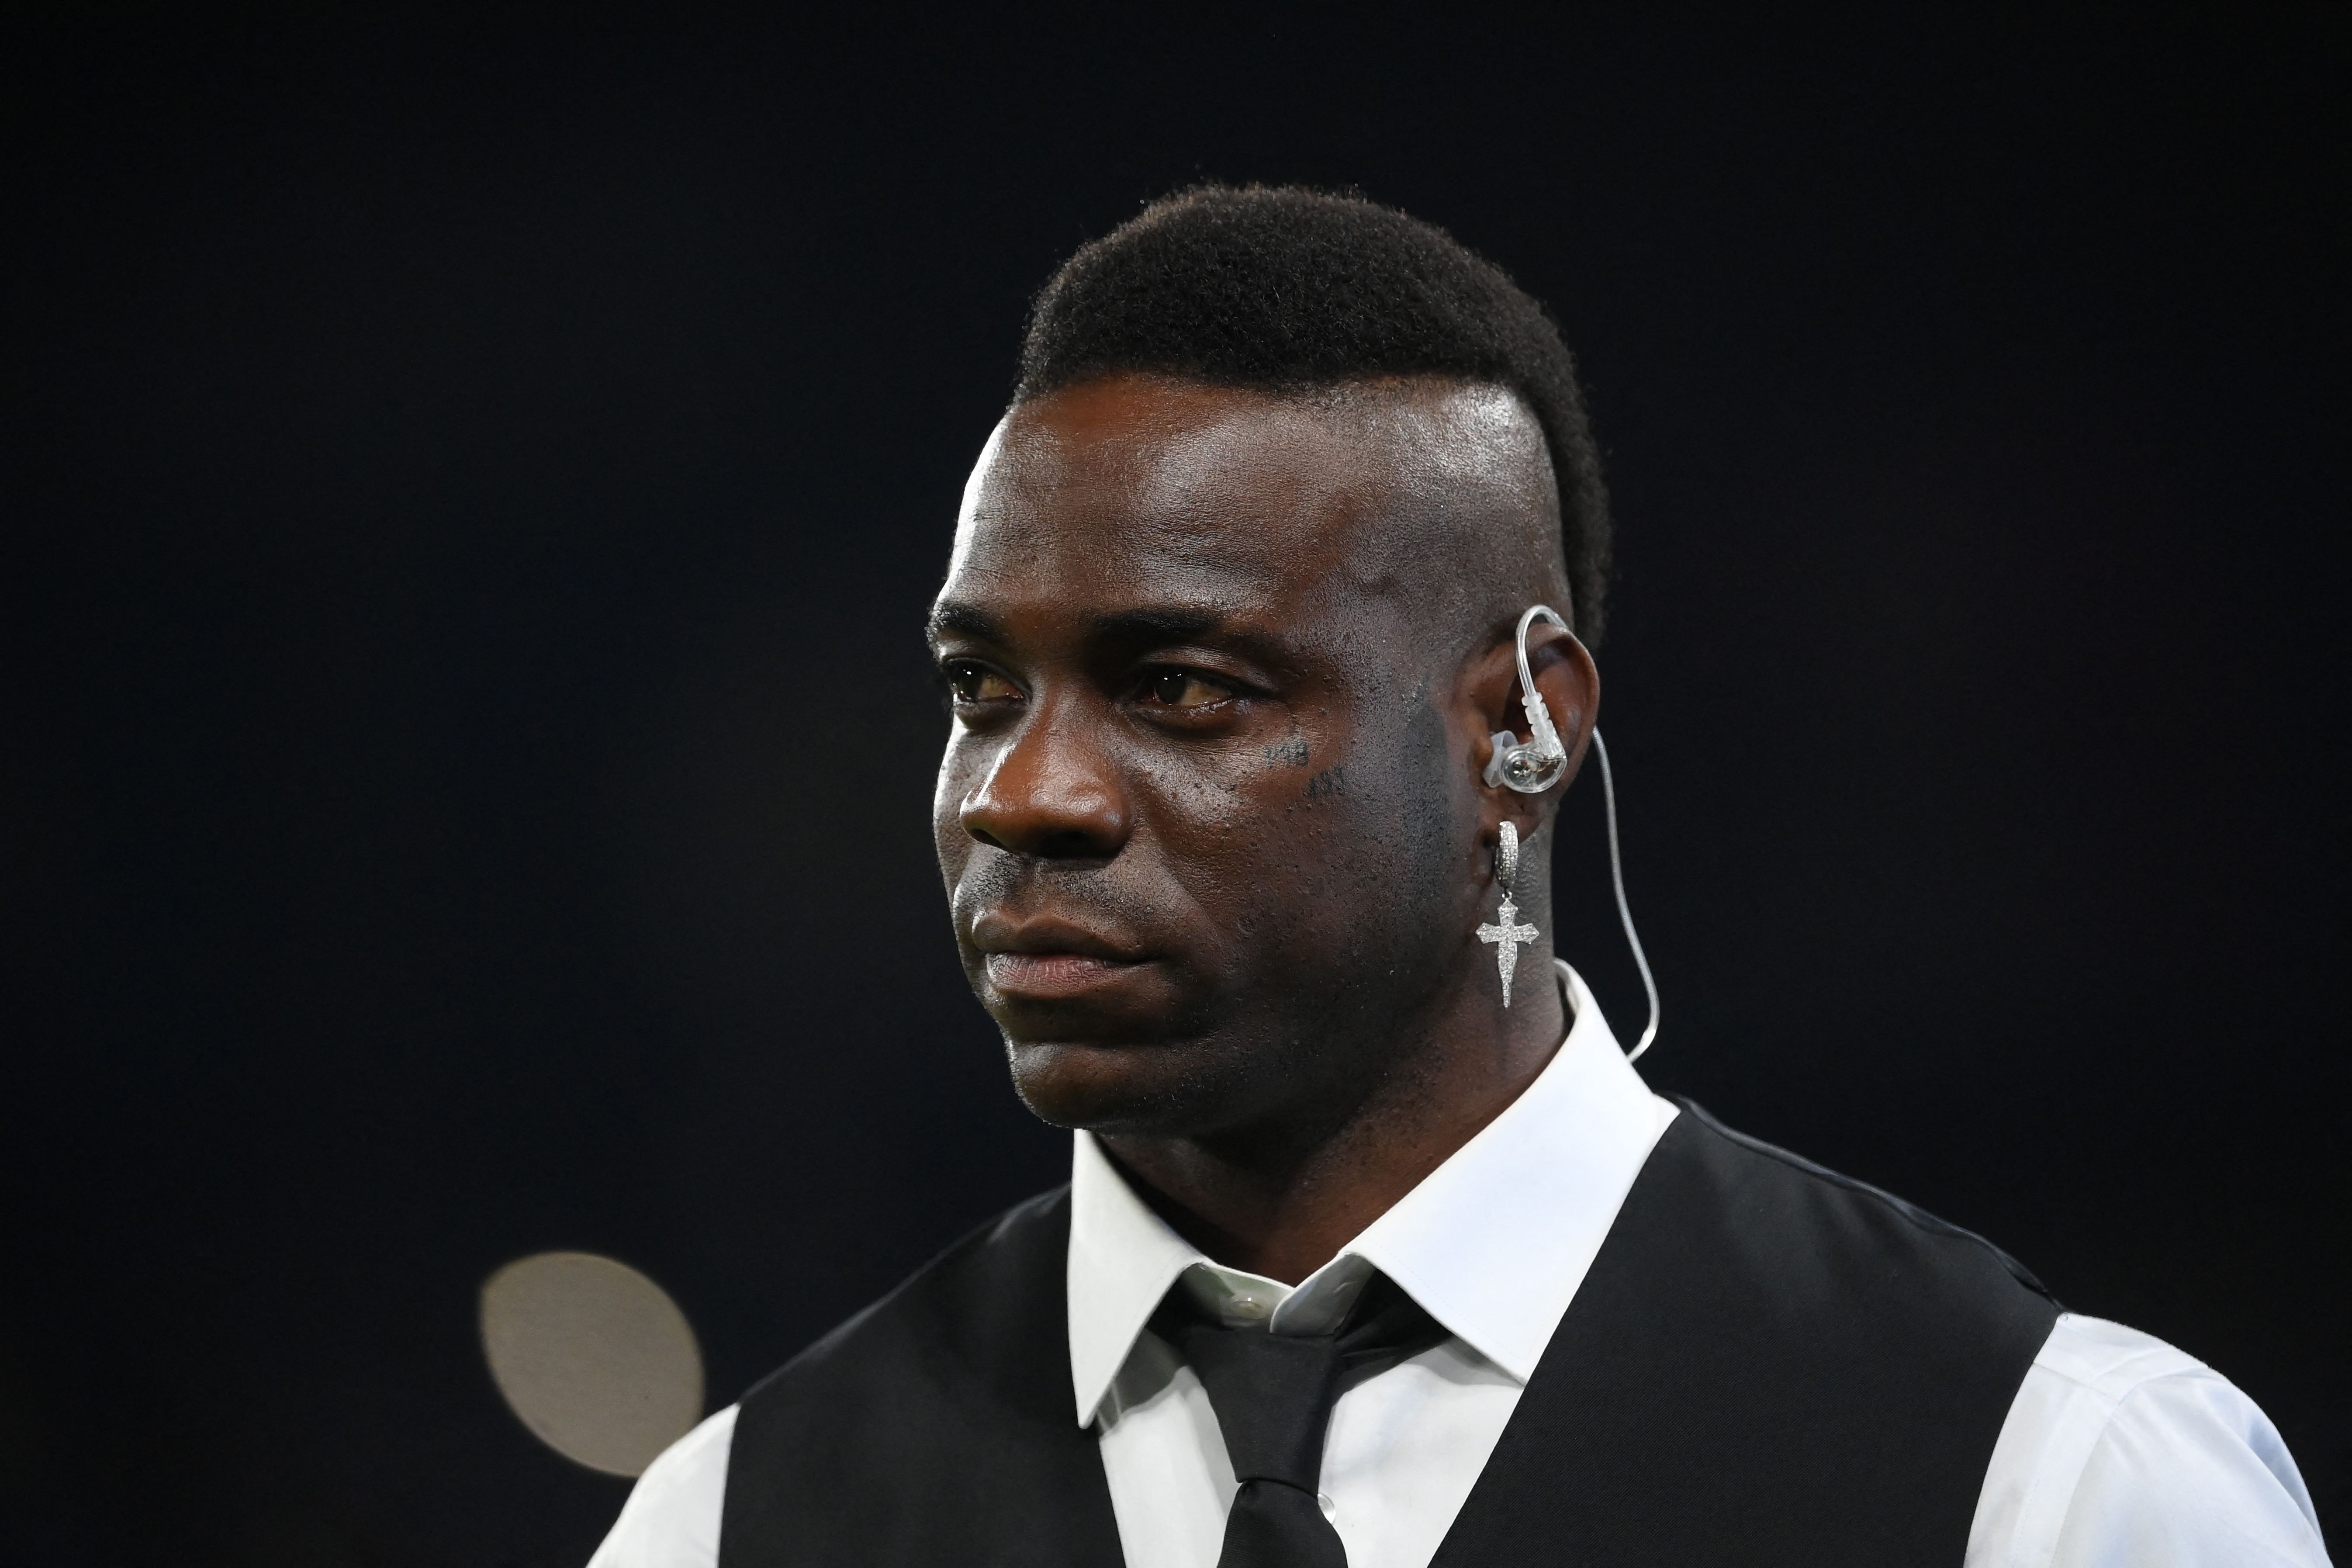 Mario Balotelli was also subjected to a ton of racism during the beginning of his career in Italy. 